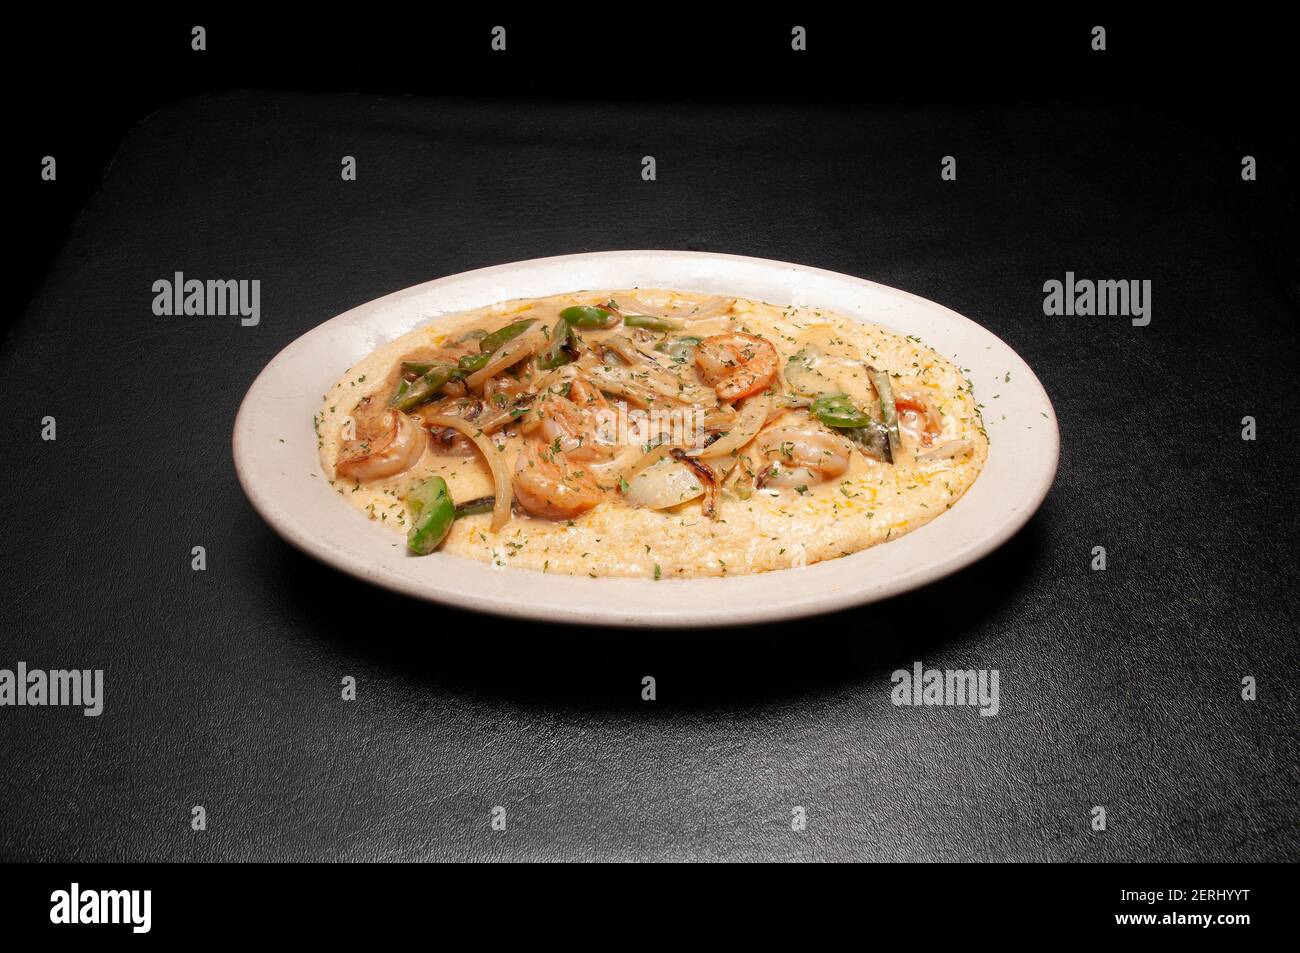 Southern American breakfast cuisine known as shrimp and grits Stock Photo